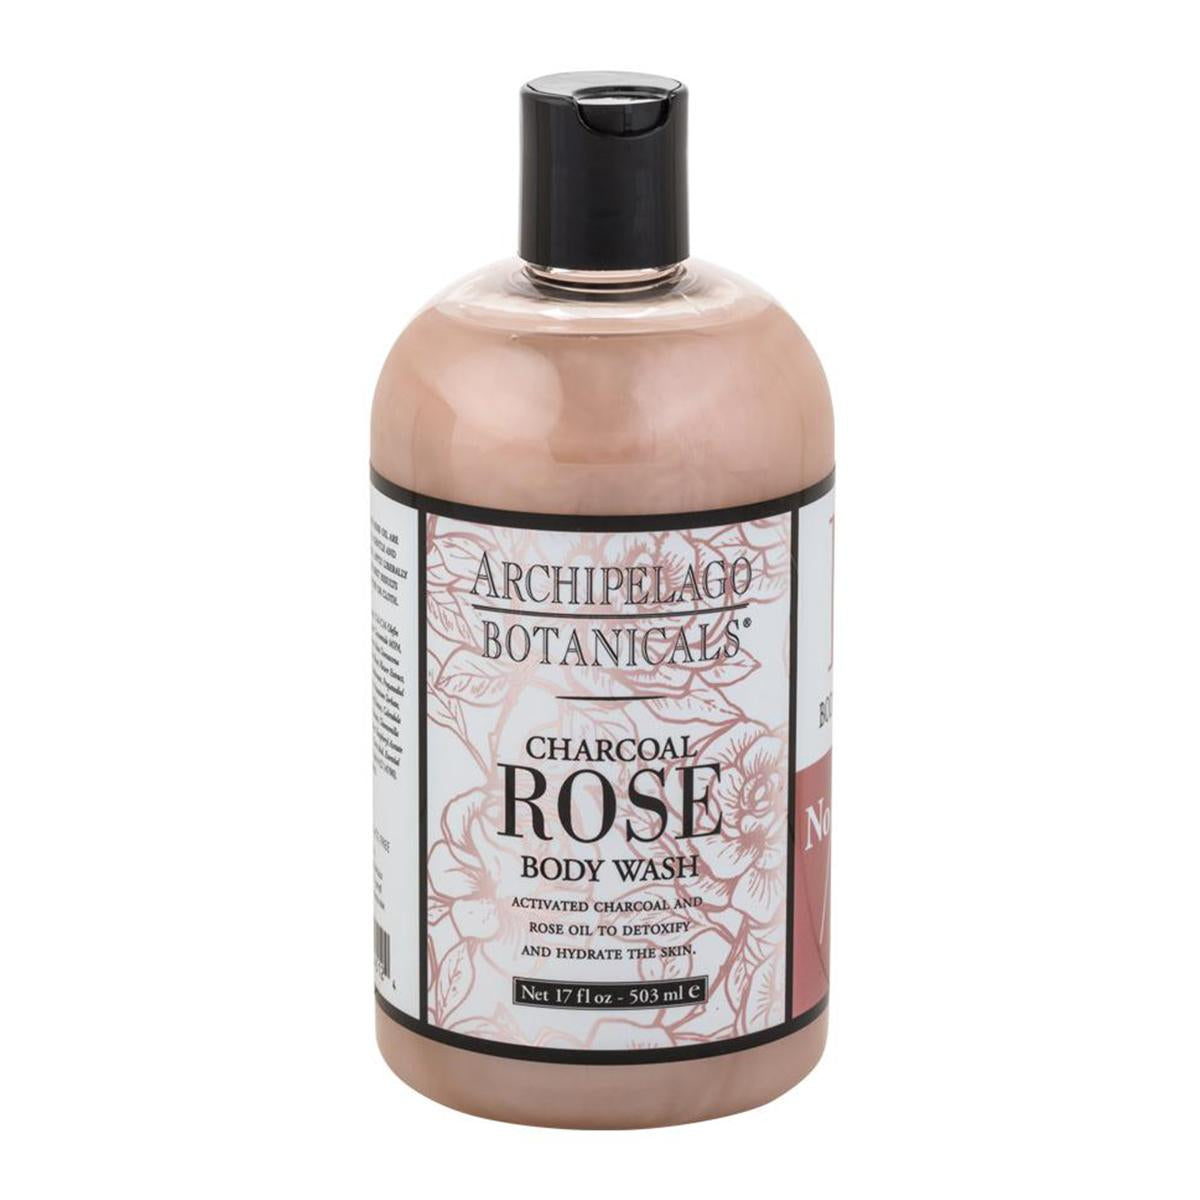 Primary image of Charcoal Rose Body Wash